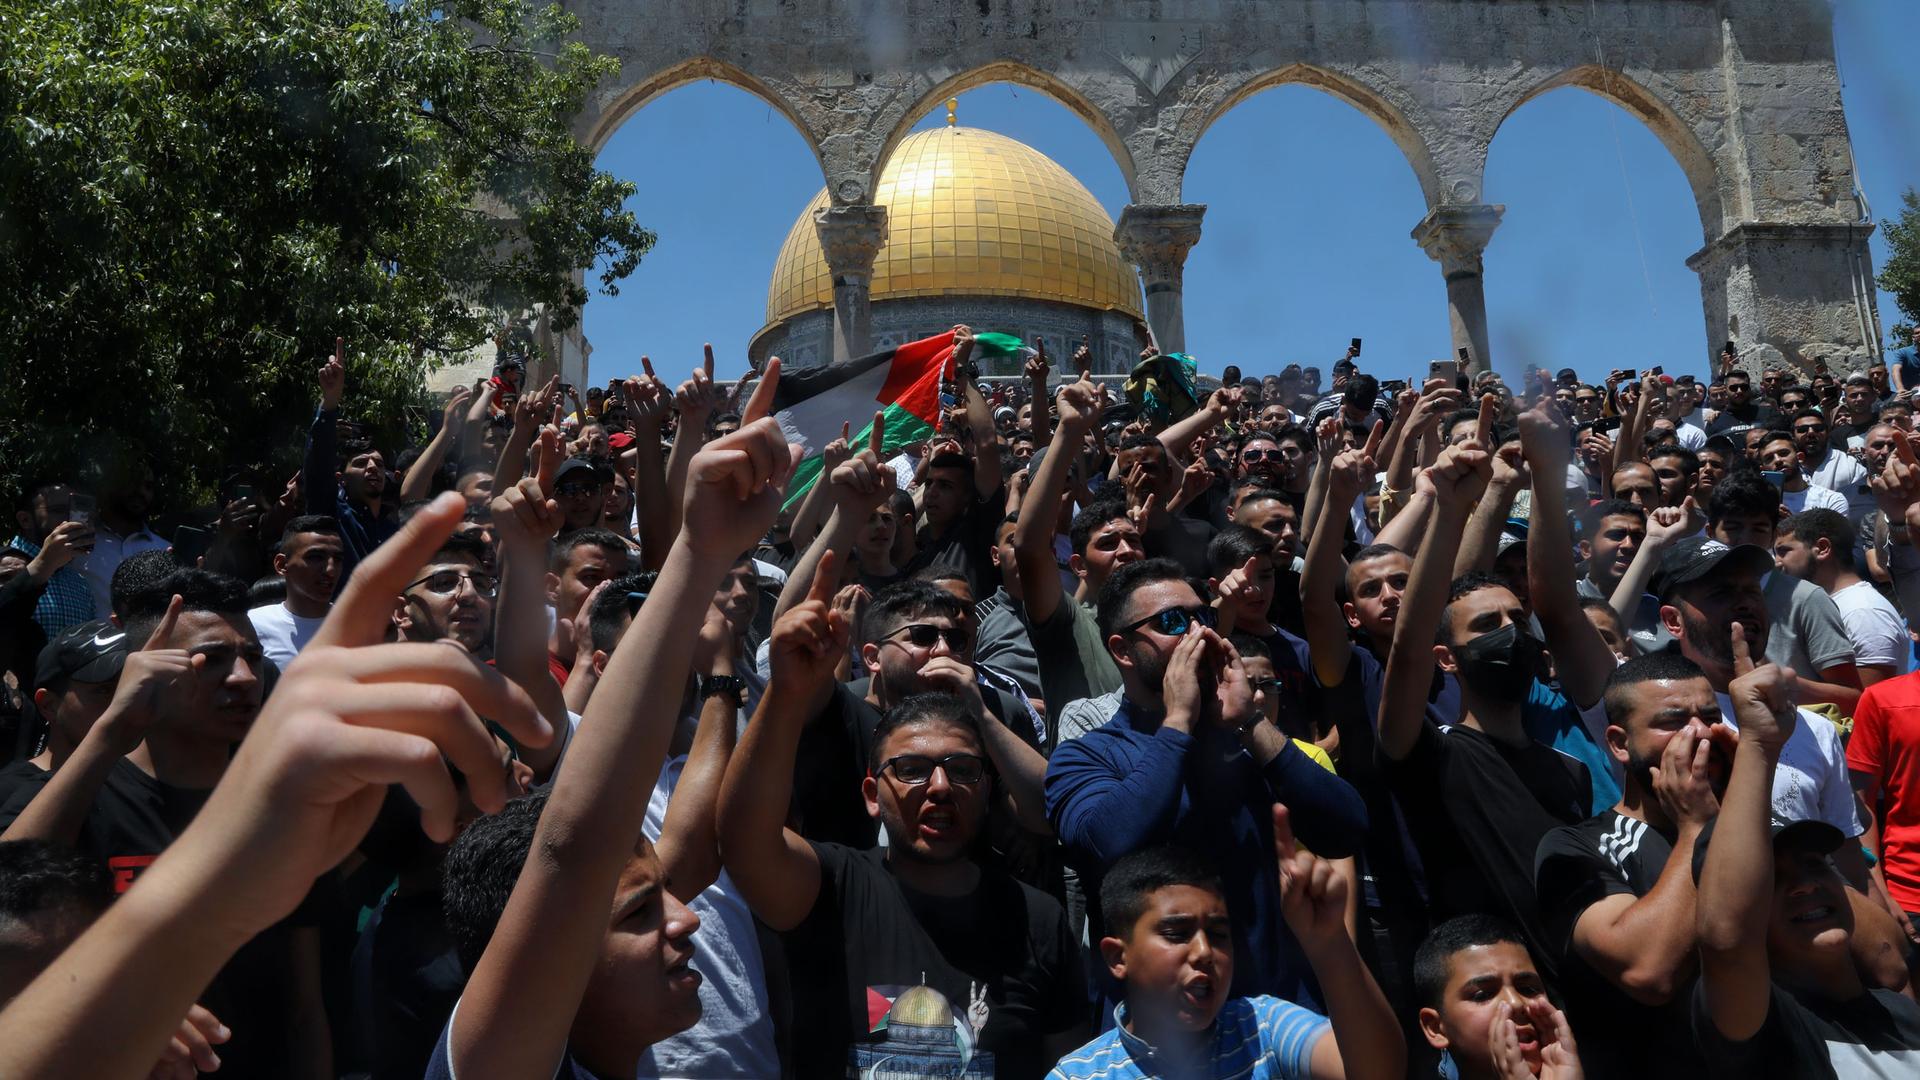 Palestinians chant slogans during a protest in front of the Dome of the Rock Mosque at the Al Aqsa Mosque compound in Jerusalem's Old City, Friday, June 18, 2021. 